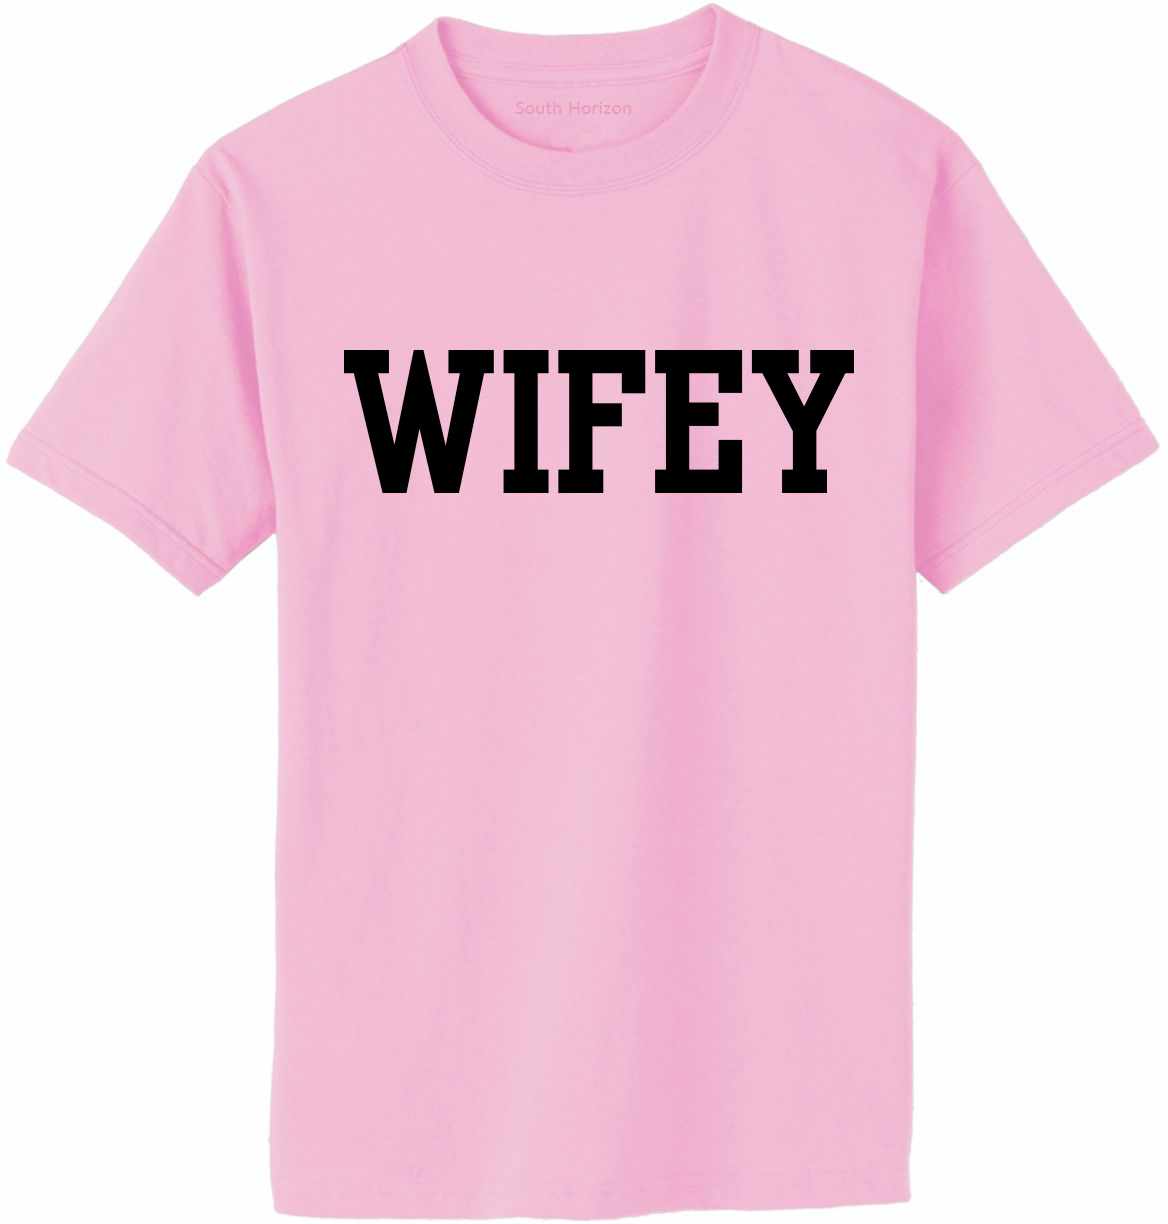 WIFEY on Adult T-Shirt (#1284-1)